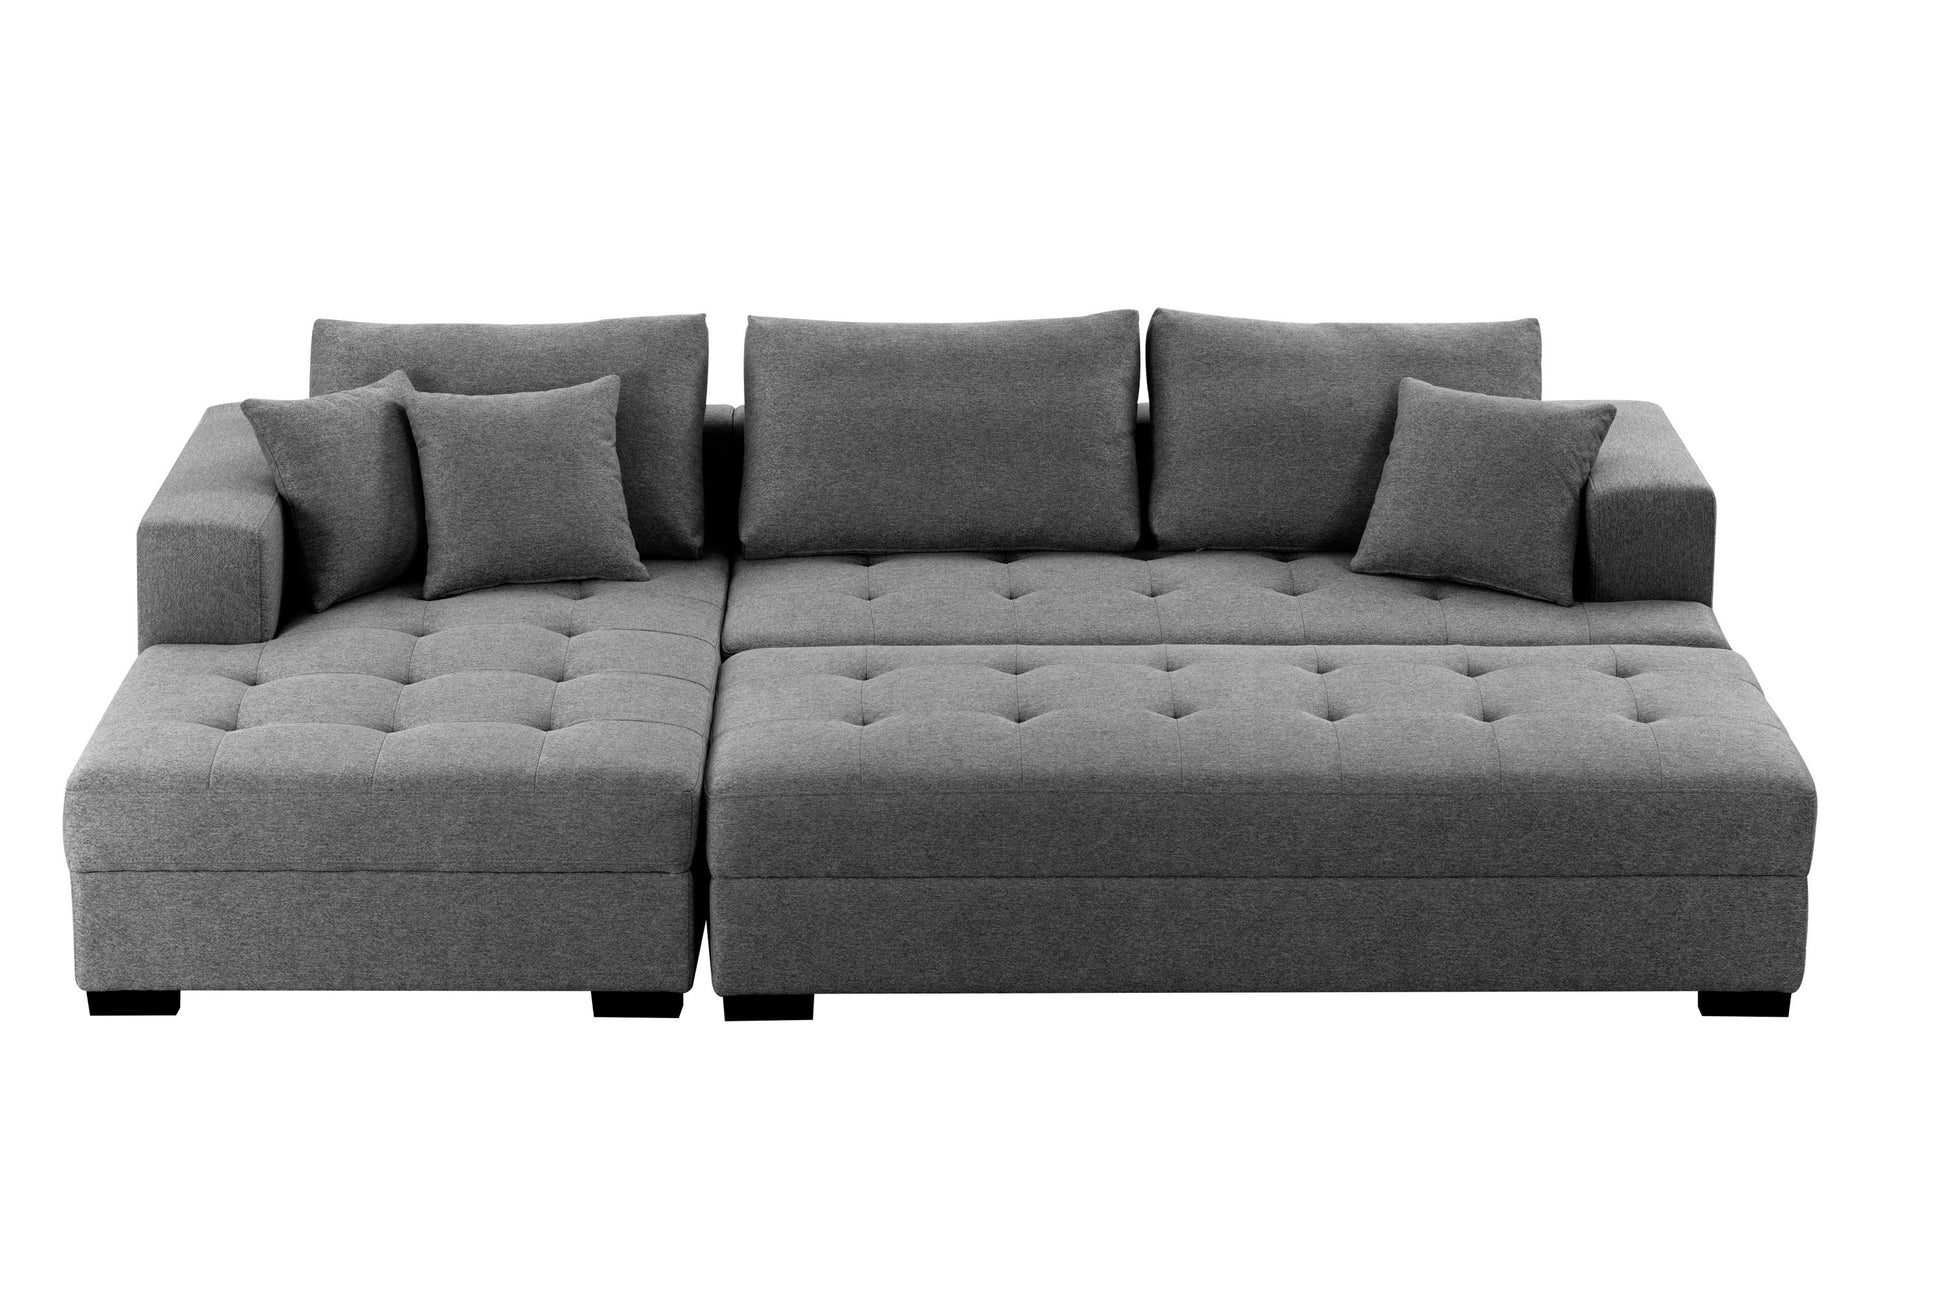 111'' Tufted Fabric 3-Seat L-Shape Sectional Sofa Couch Set w/Chaise Lounge, Ottoman Coffee Table Bench, Dark Grey